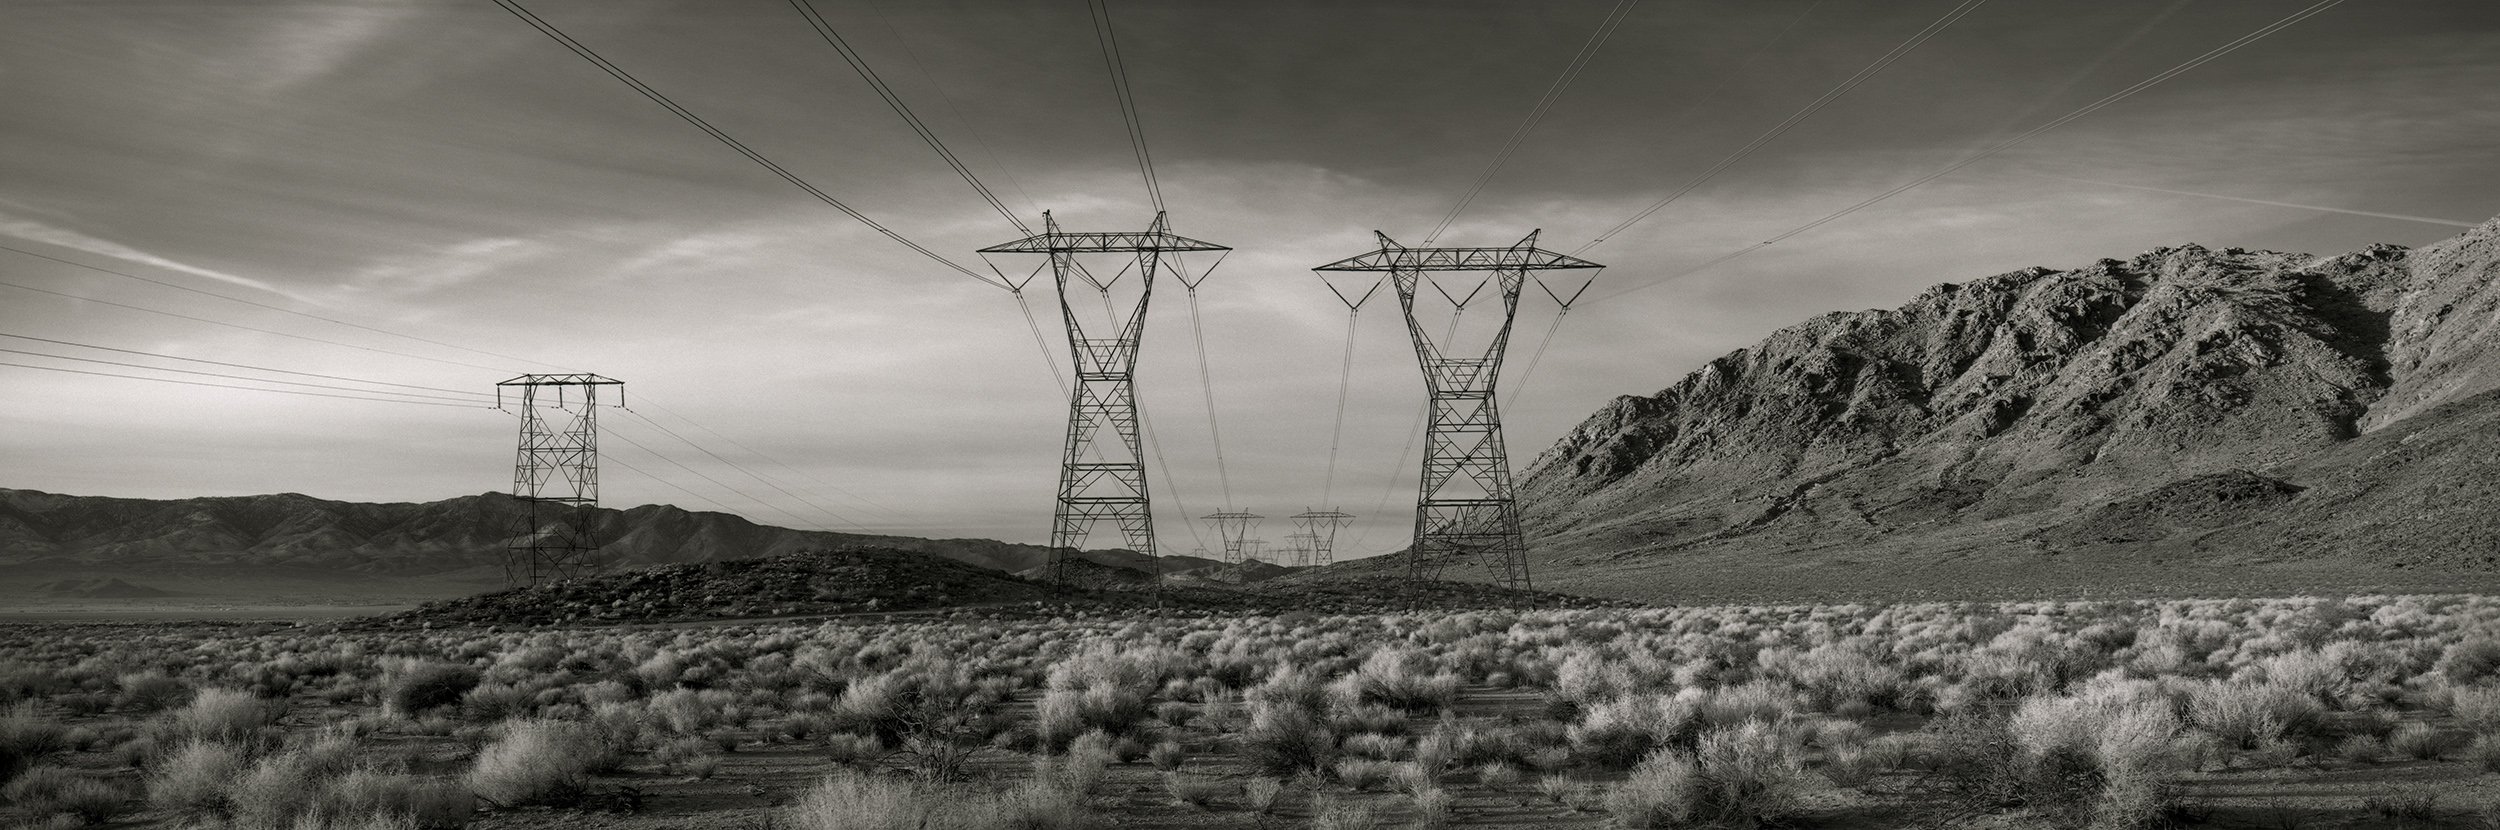  Lucerne Valley #3. January 9, 2013 